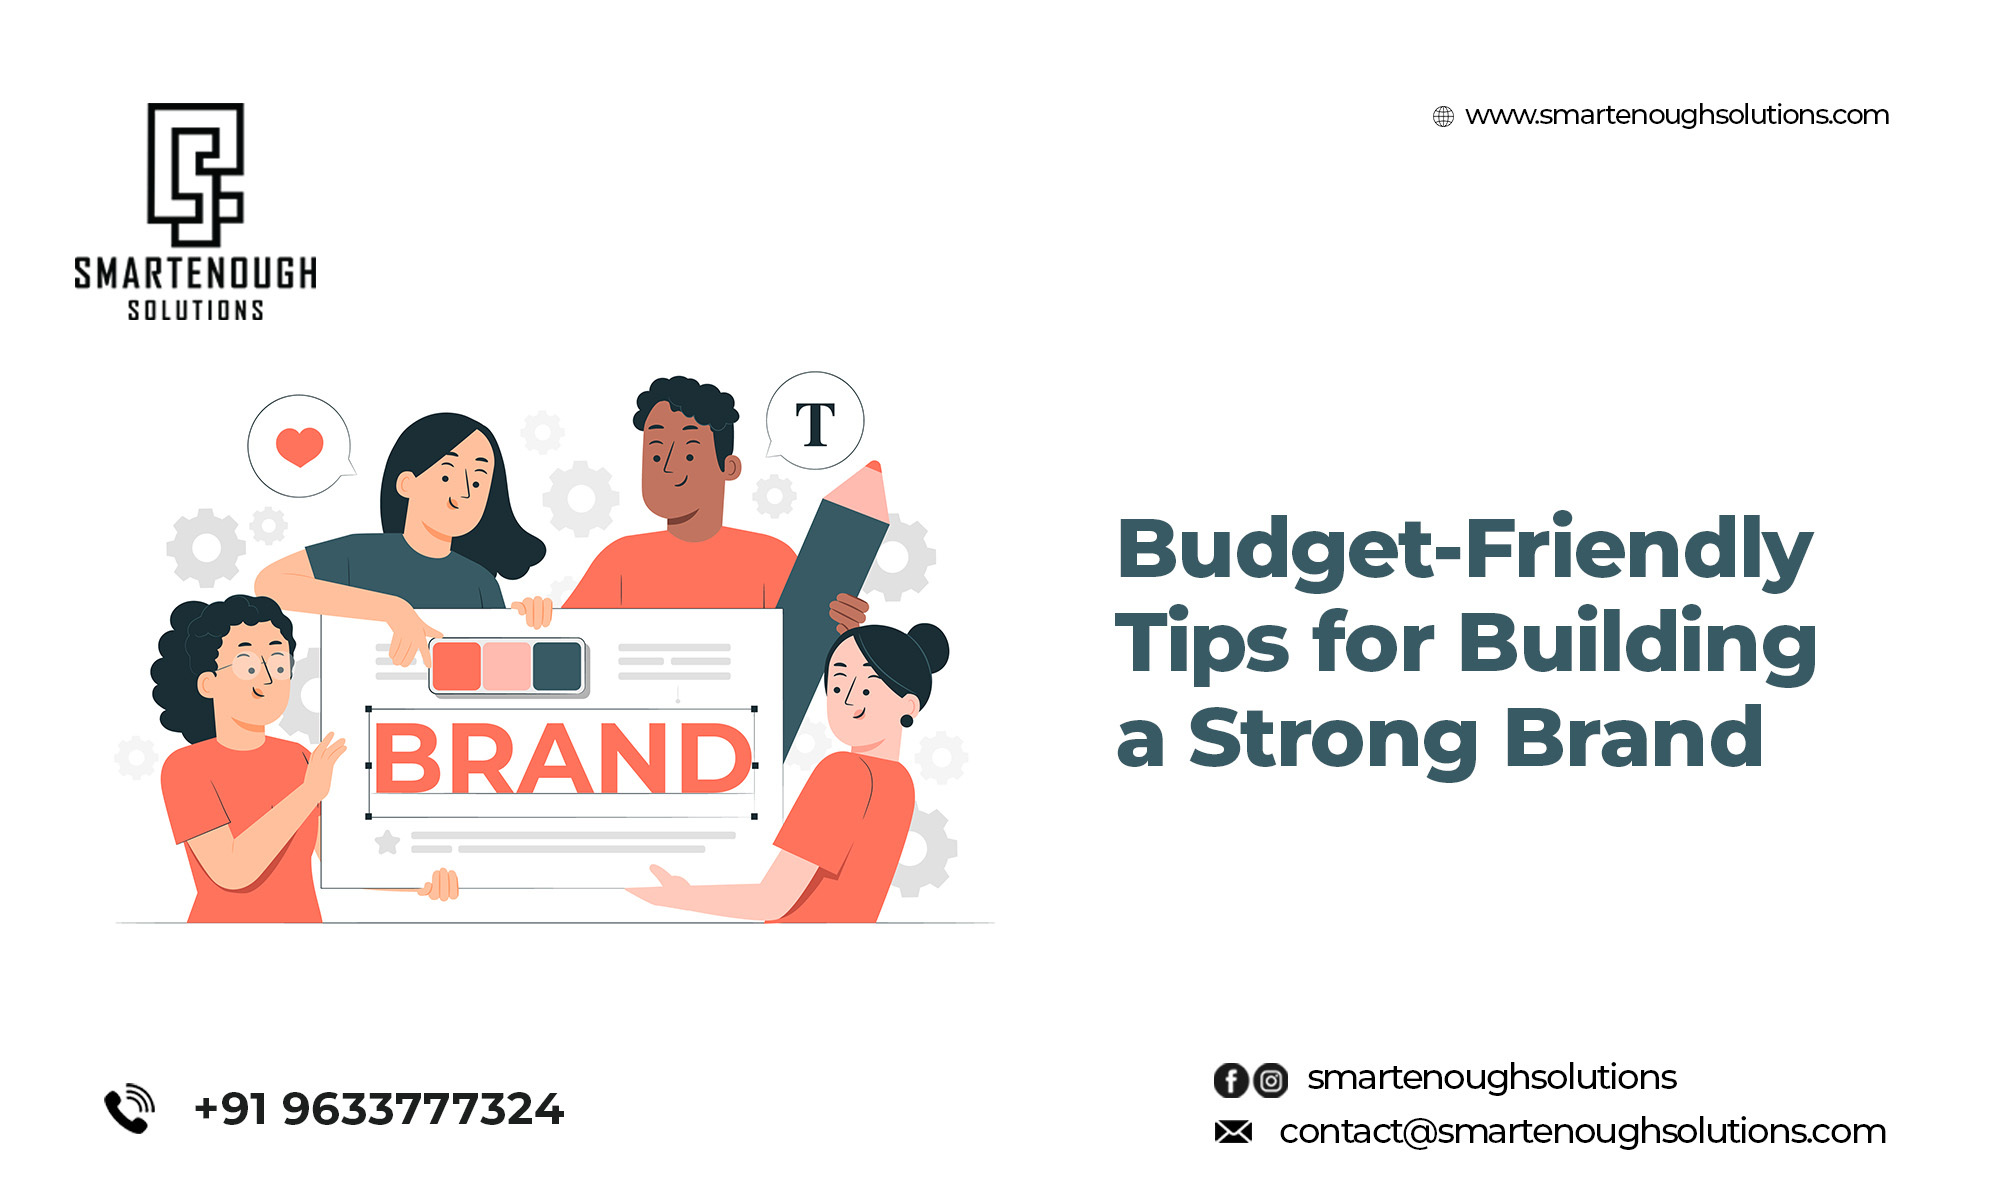 Budget-Friendly Tips for Building a Strong Brand